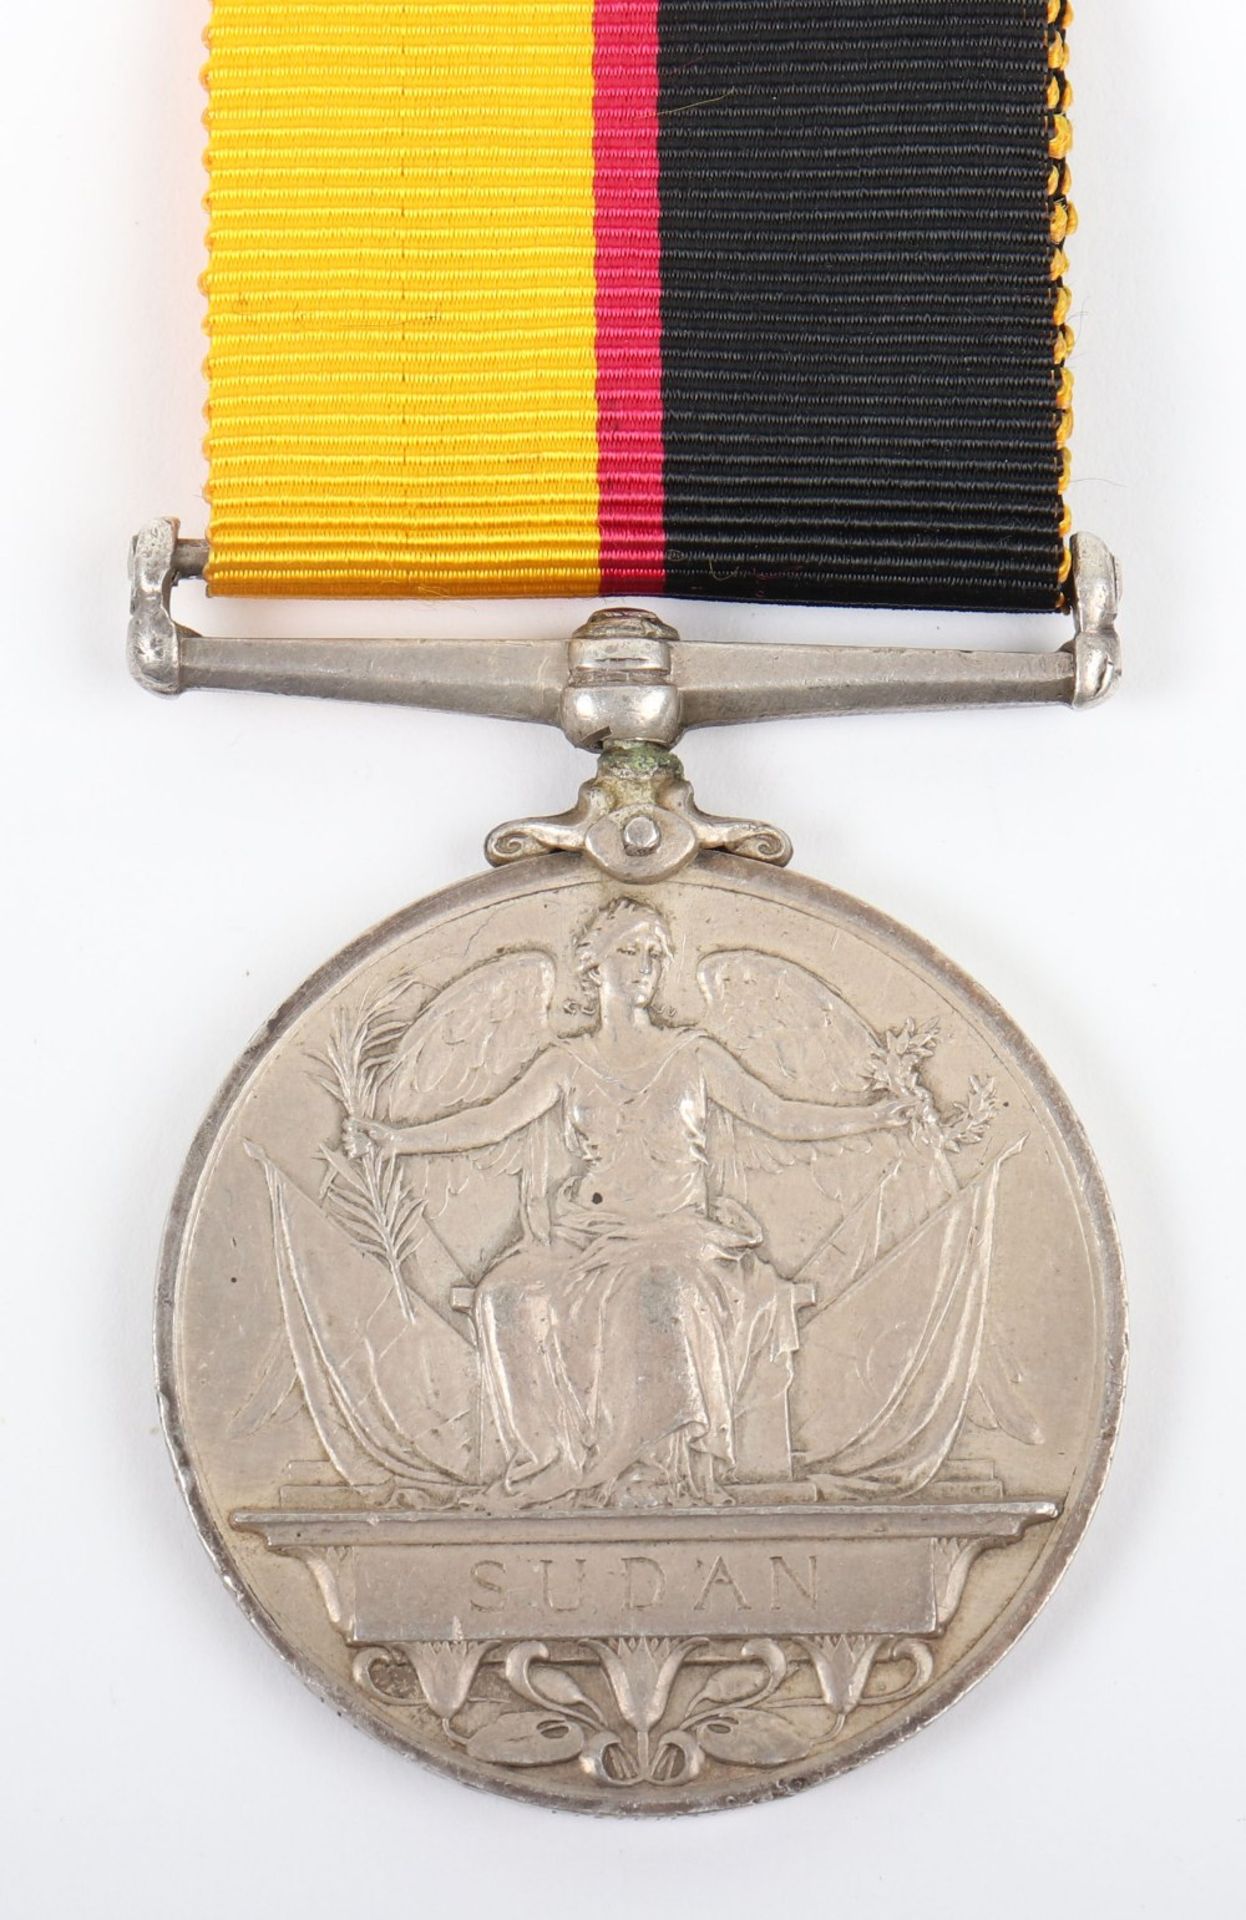 Queens Sudan Medal Sikh Bengal Infantry - Image 3 of 3